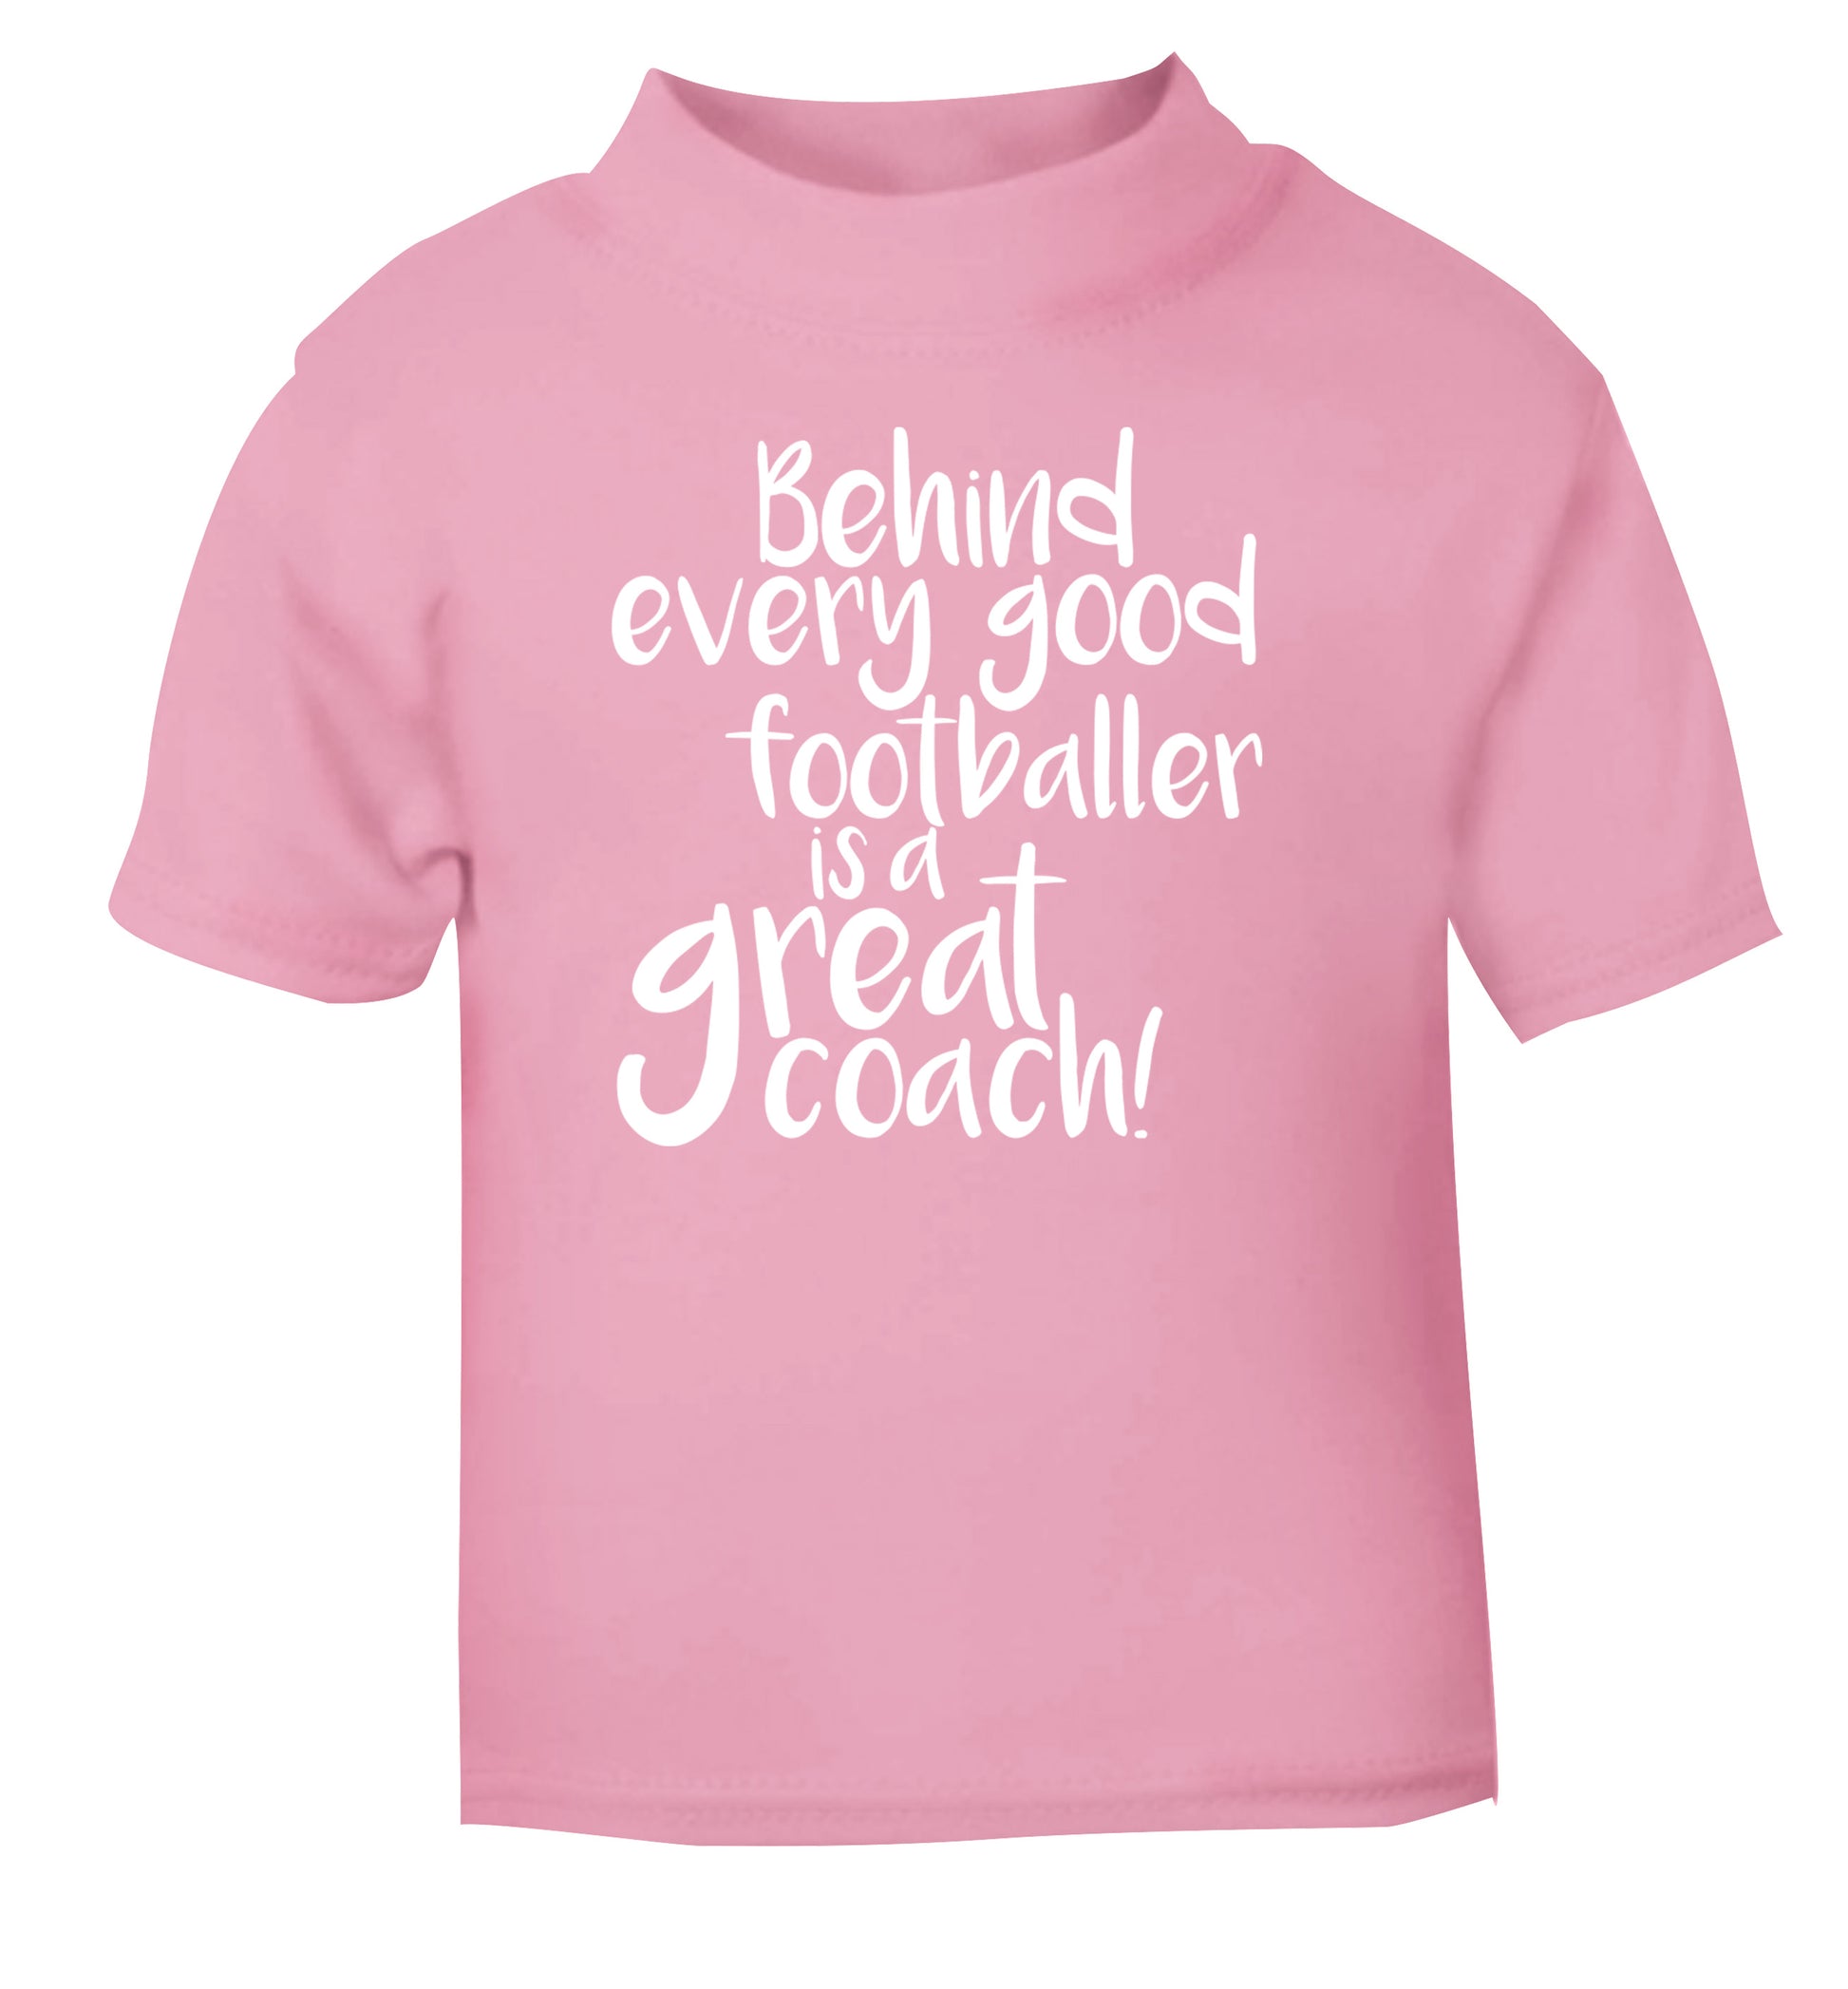 Behind every good footballer is a great coach! light pink Baby Toddler Tshirt 2 Years